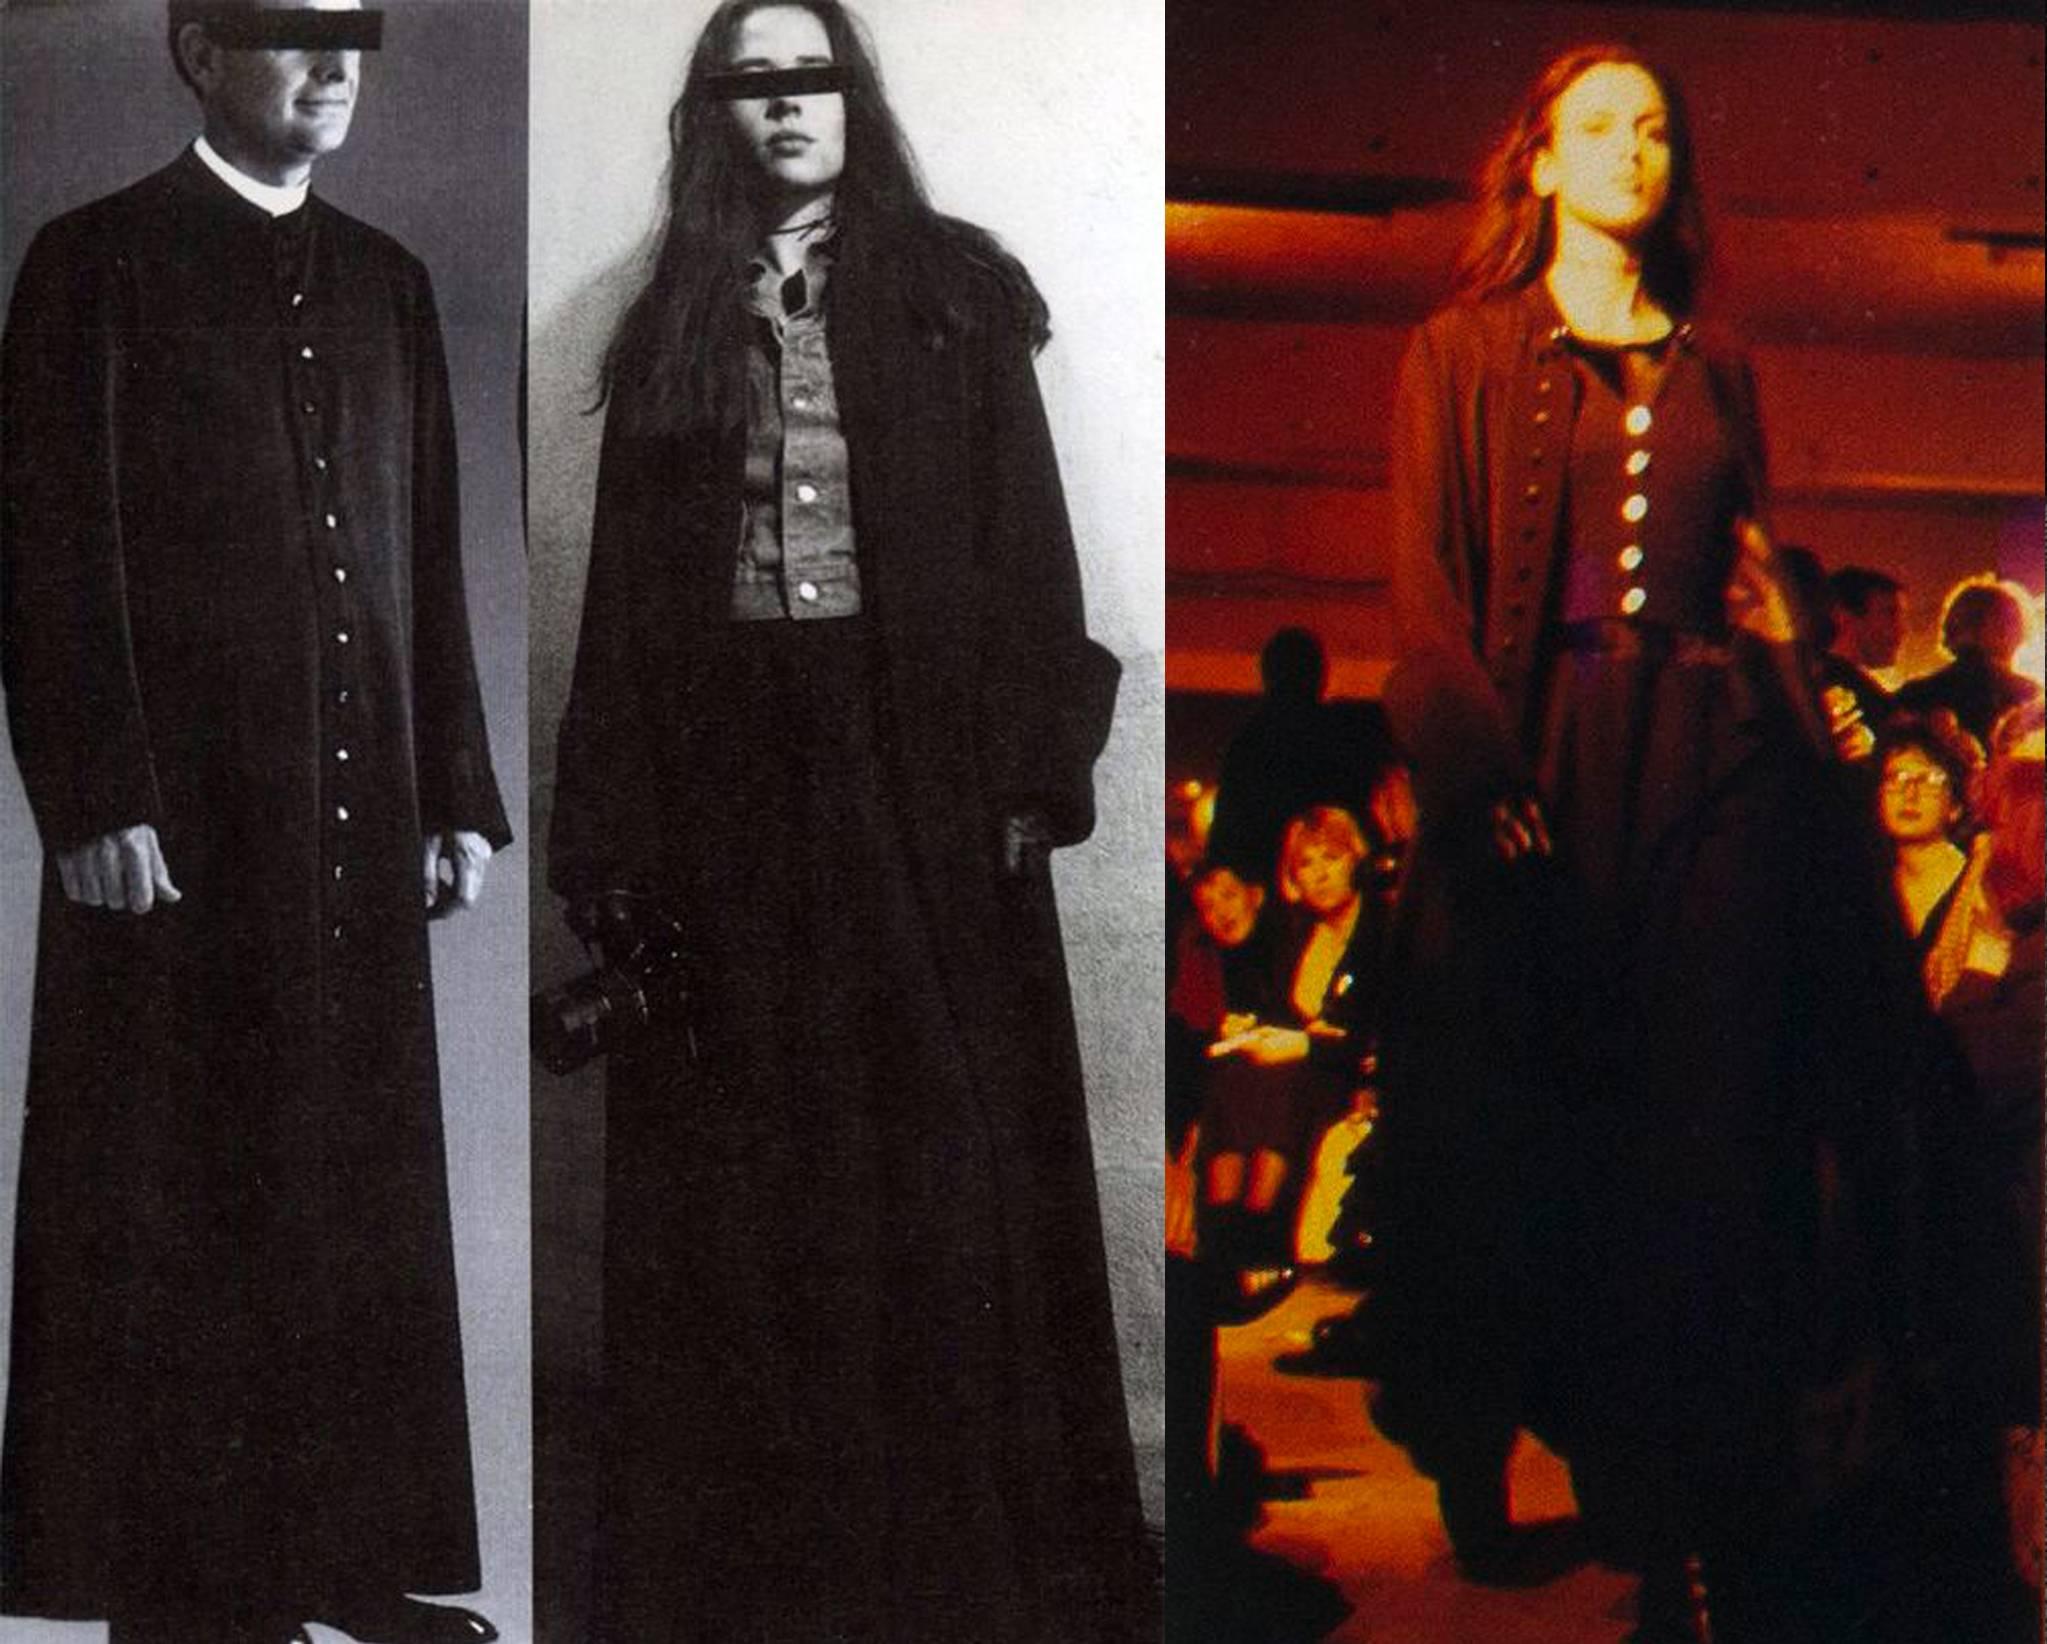 Maison Martin Margiela Autumn-Winter 1992 black cotton full length priest coat

- 31 button closures from the collar to the hem
- 2 metal hook-and-eye closures on the collar
- mandarin collar
- large turn-over cuffs
- 2 hidden side pockets
-